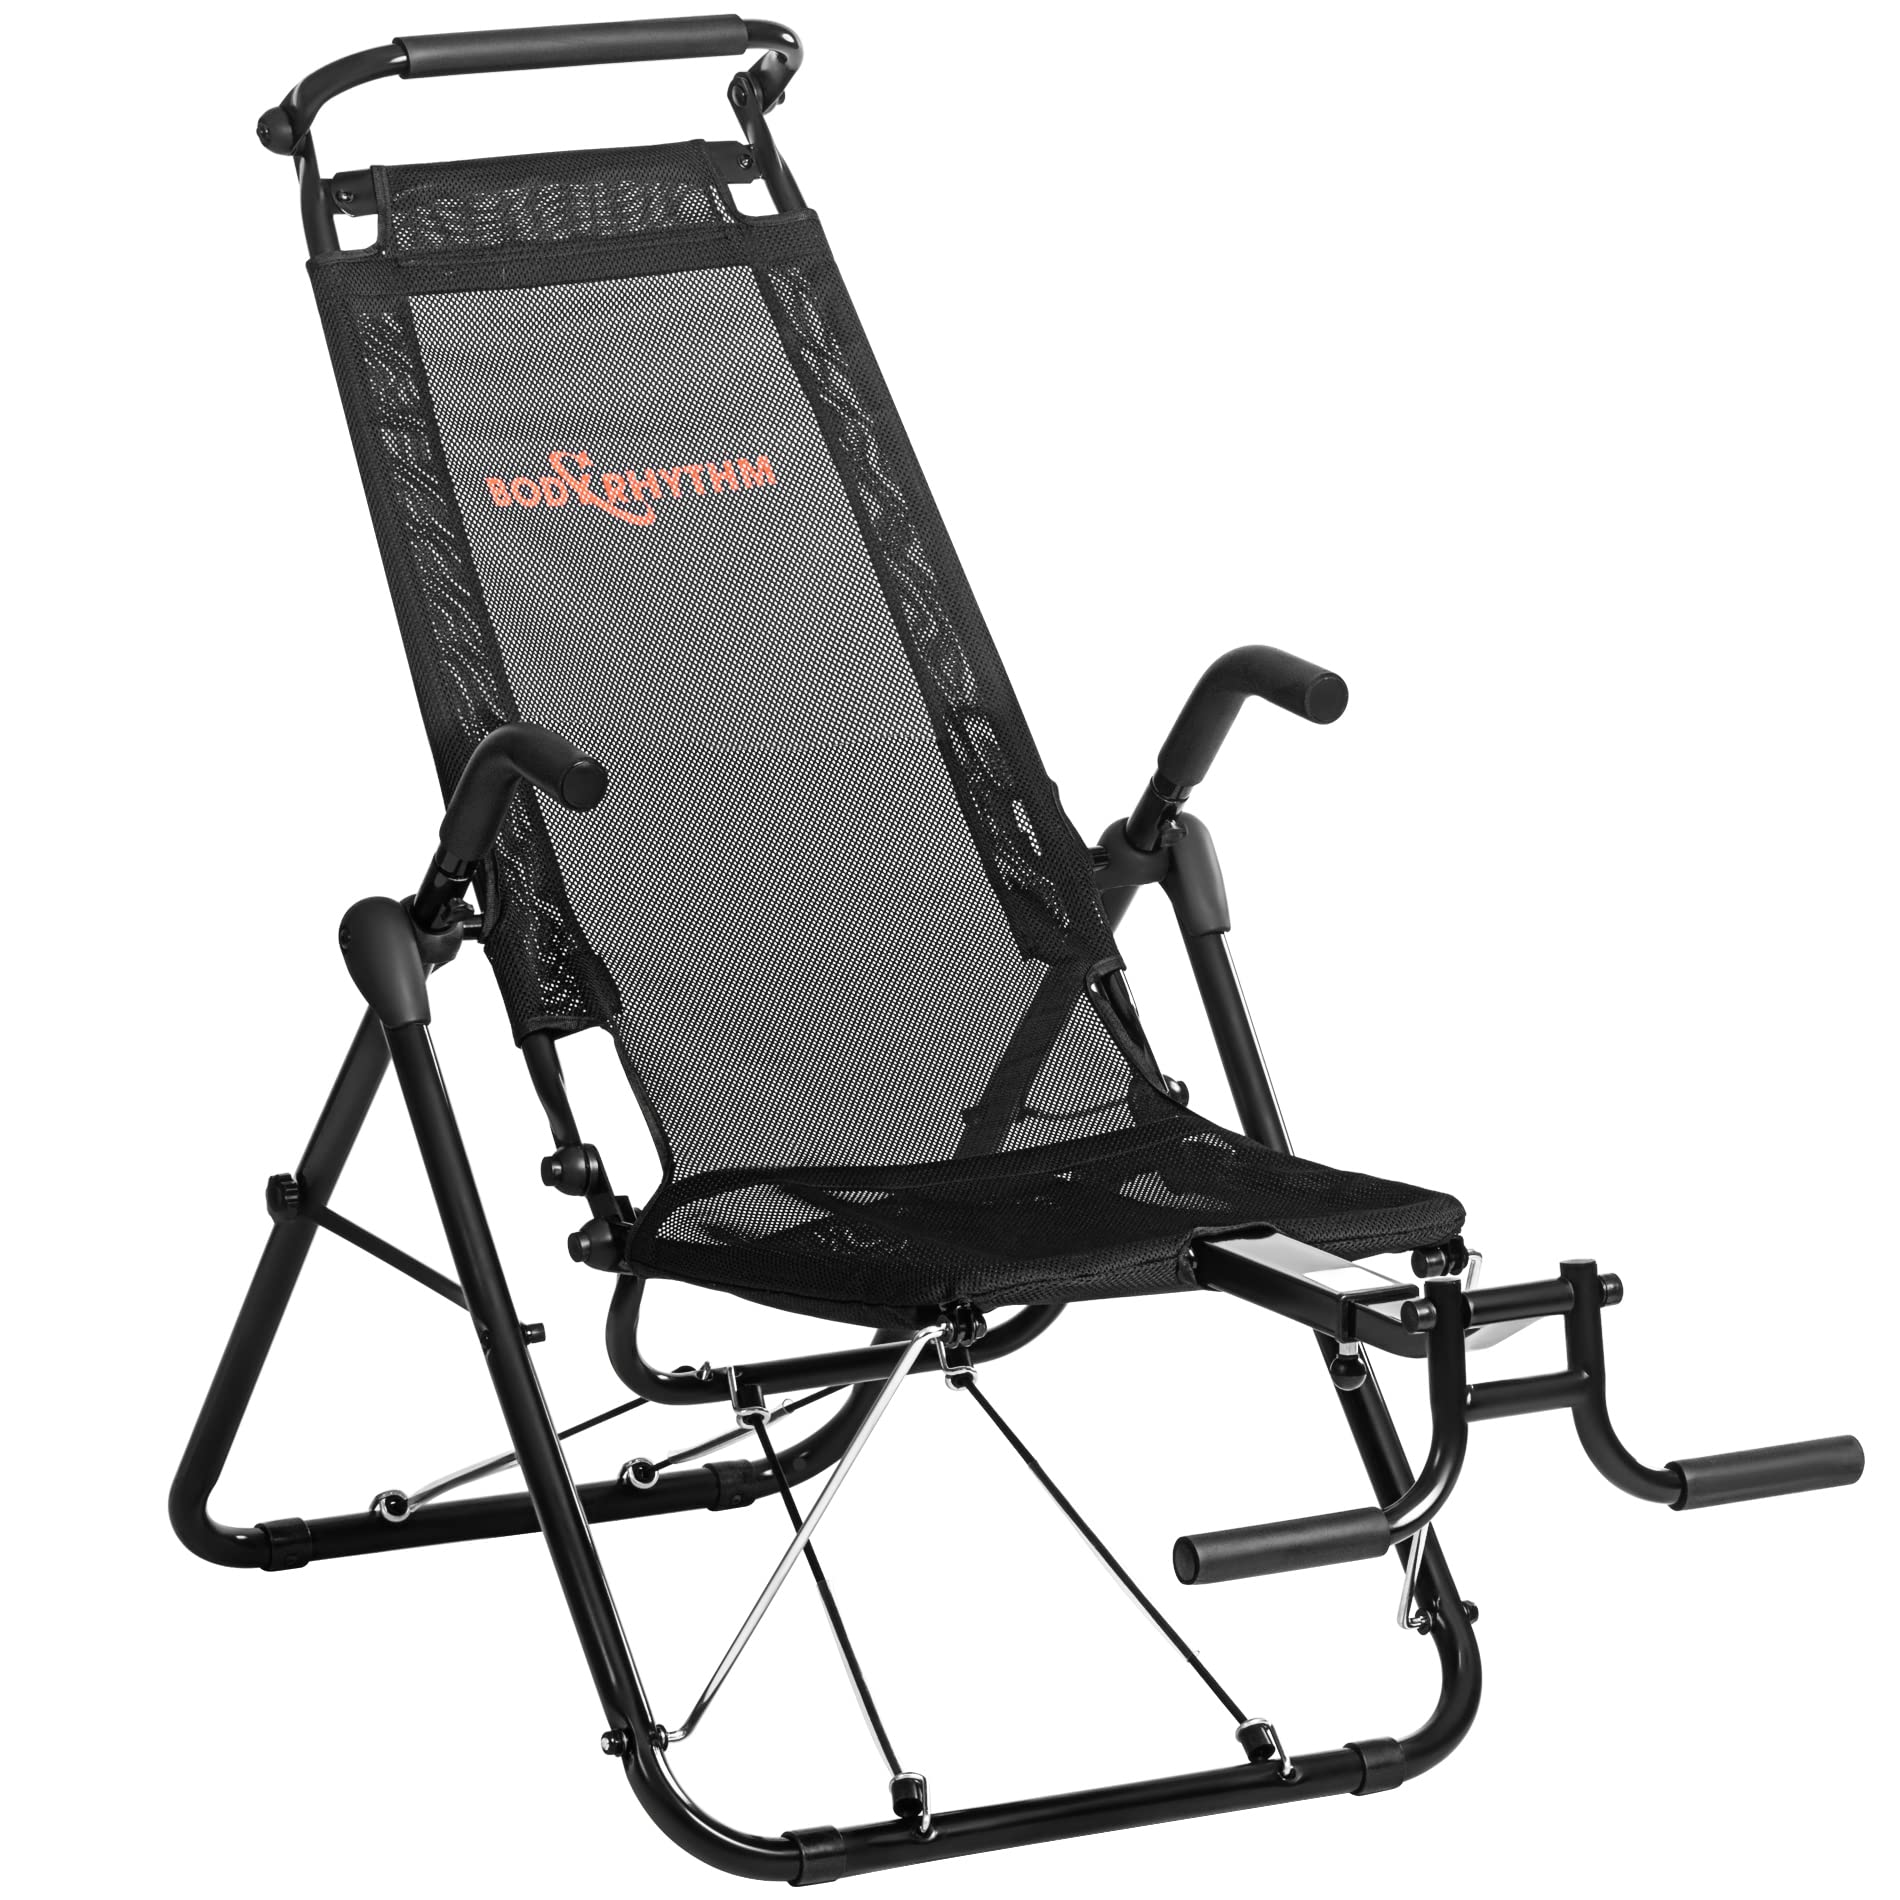 Body Rhythm BODYRHYTHM core  Ab Lounge Workout chair, an Fitness System for Muscle Activating Workout and Inversion Therapy for Back Relief 